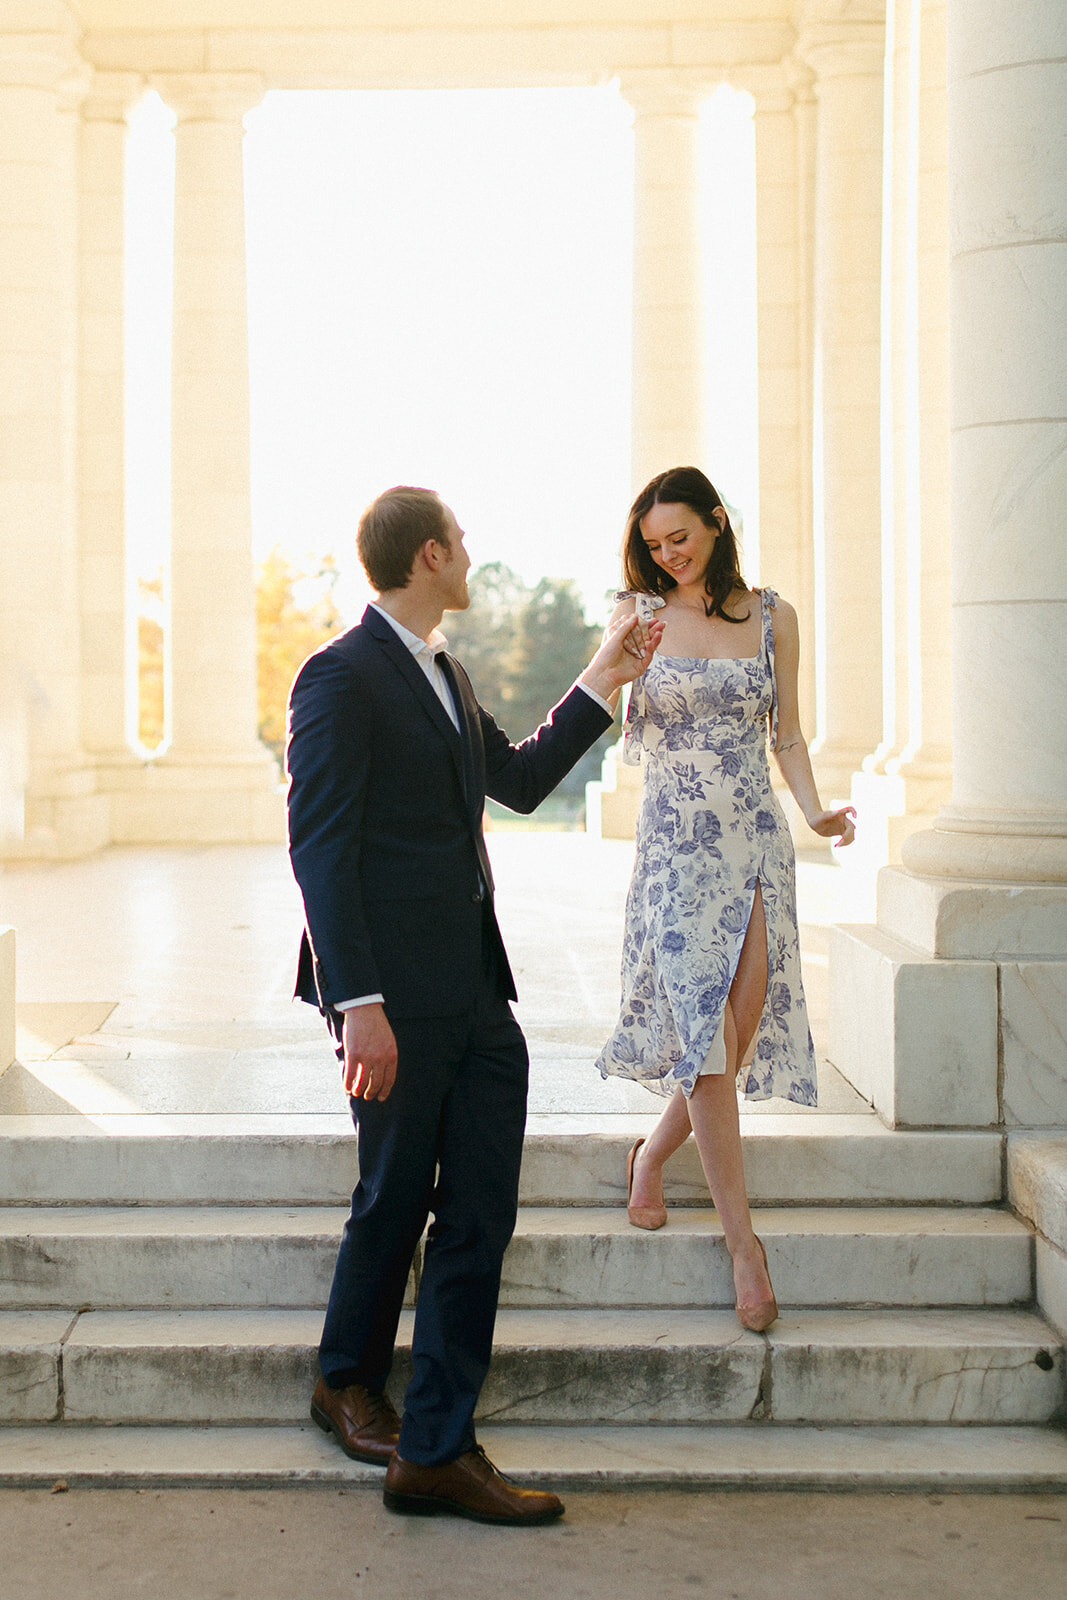 Man leads woman down steps at Cheesman Park Pavilion during engagement session.